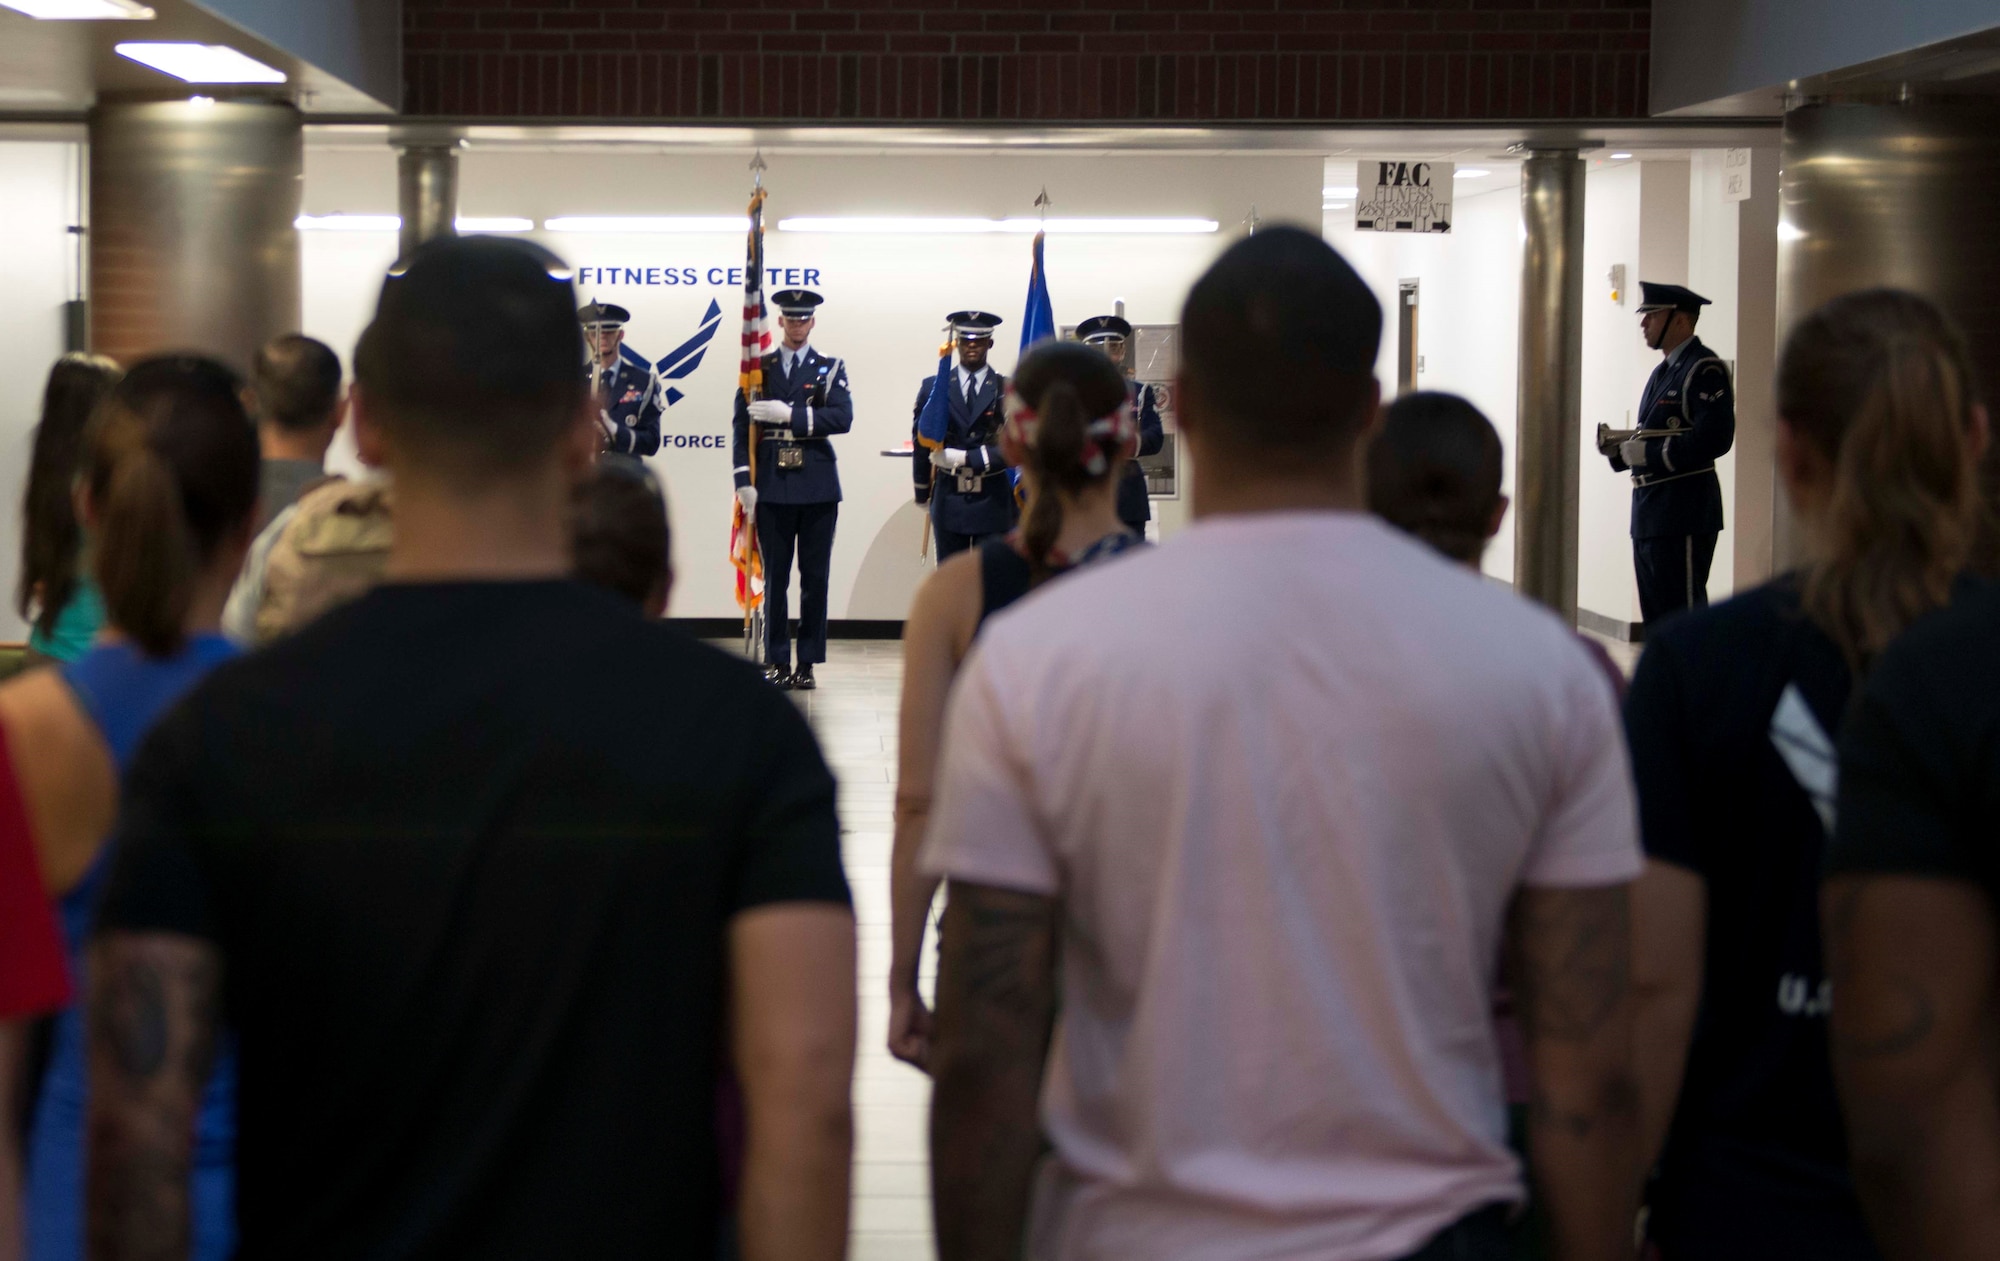 Team Shaw members stand at attention during the presentation of the colors prior to the Murph Challenge at Shaw Air Force Base, S.C., May 24, 2018.